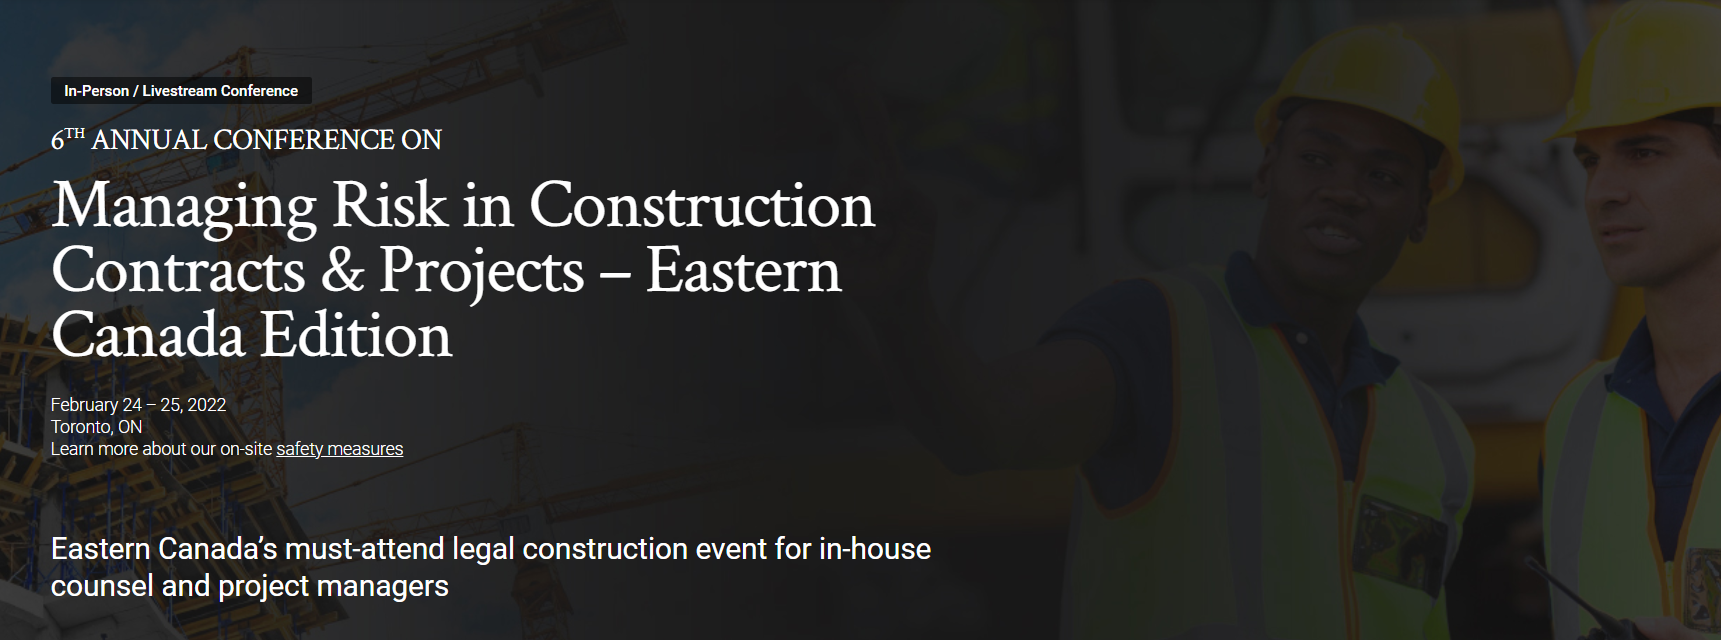 Managing Risk in Construction Contracts & Projects – Eastern Canada Edition